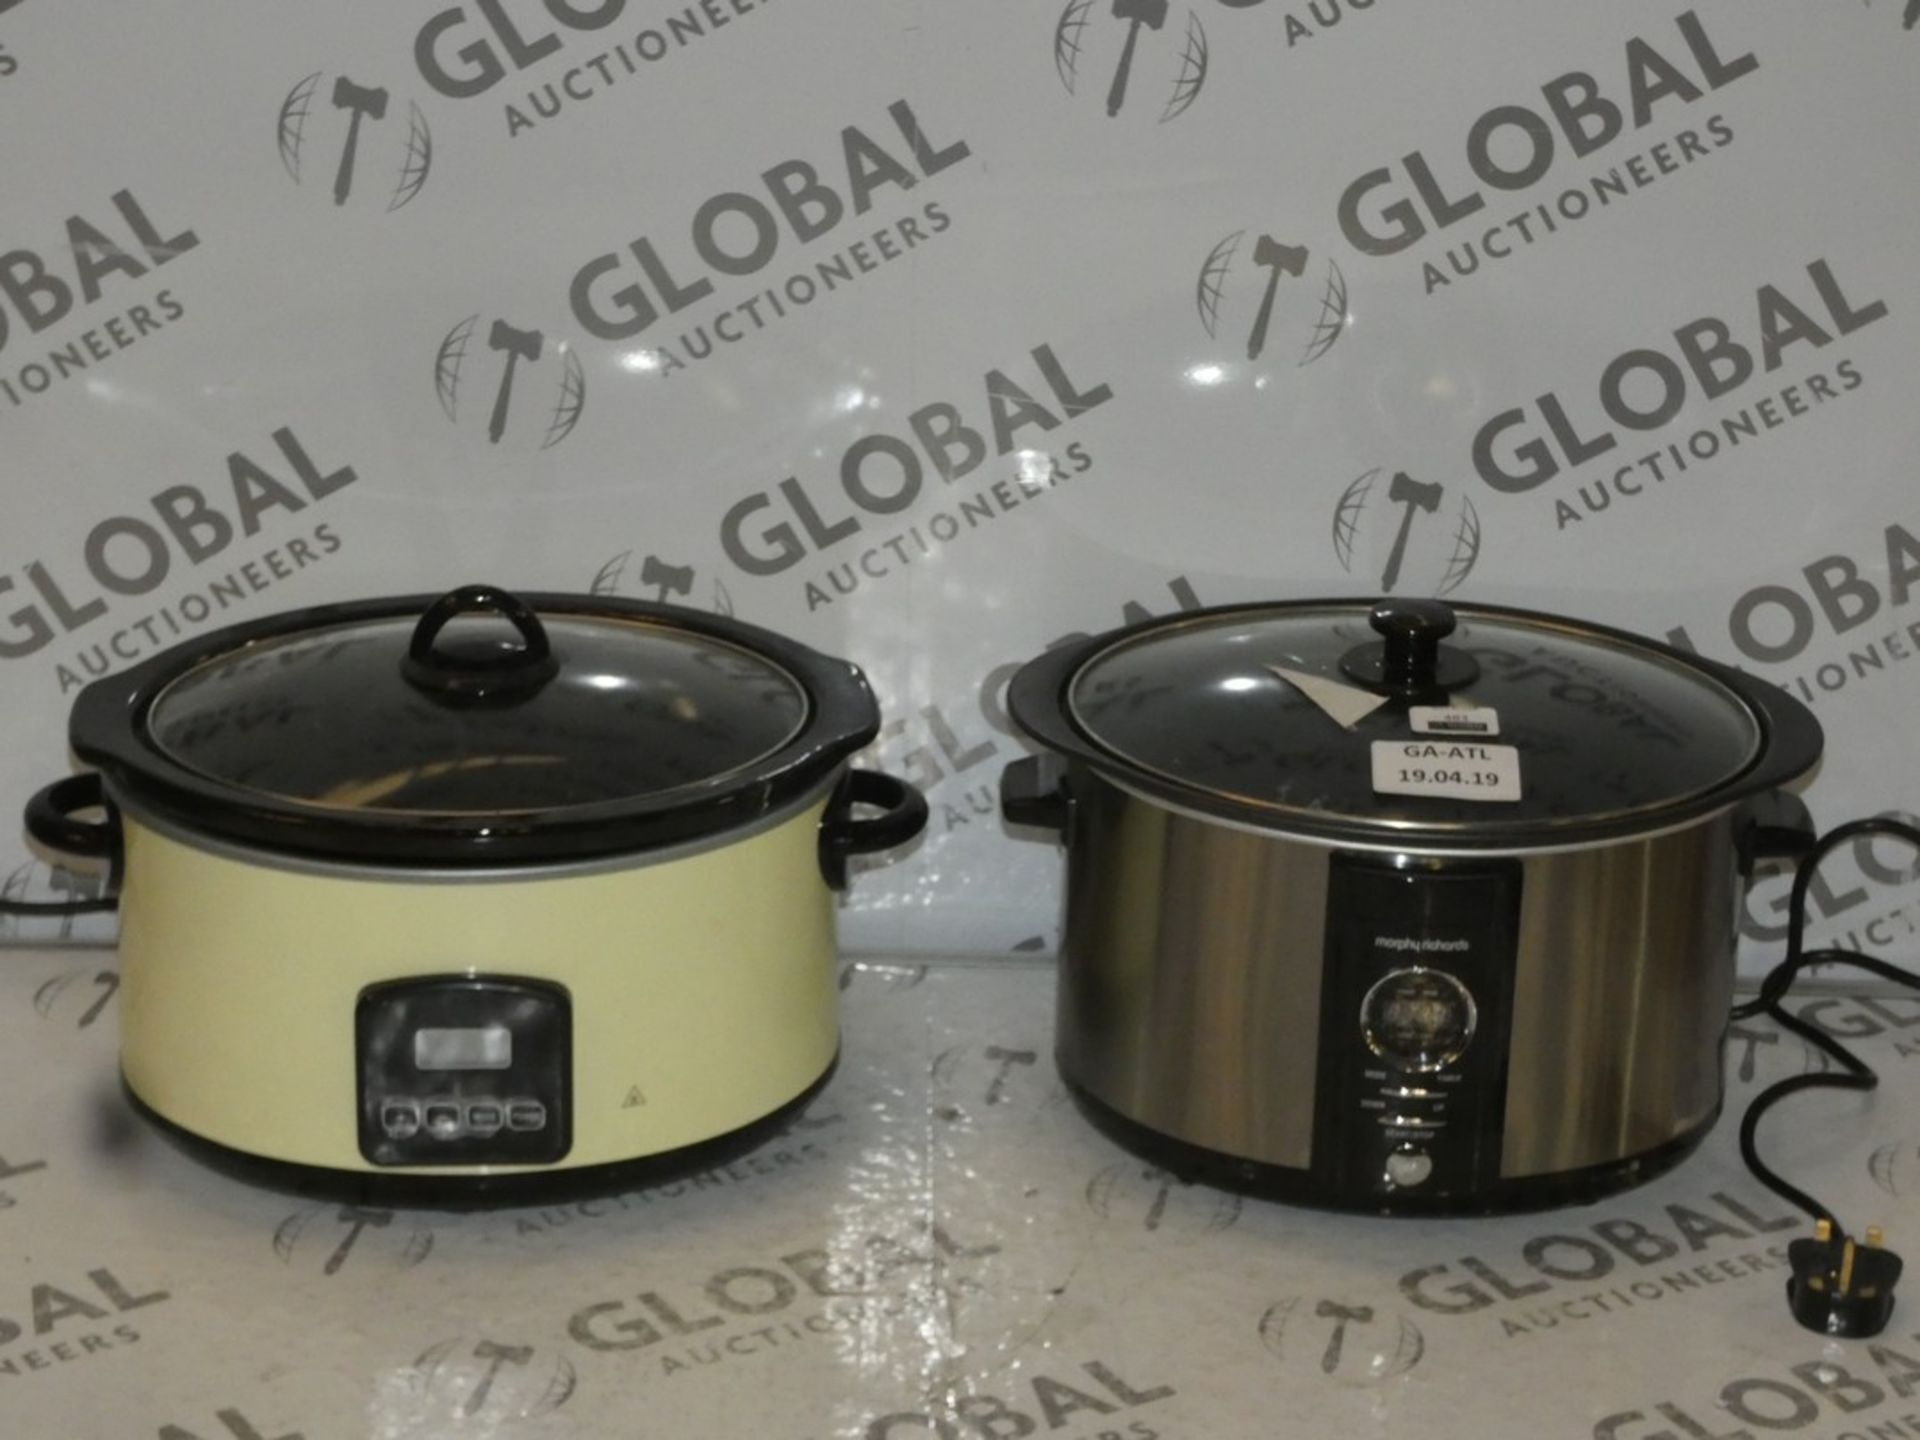 Lot to Contain 2 Assorted Morphy Richards Slow Cookers